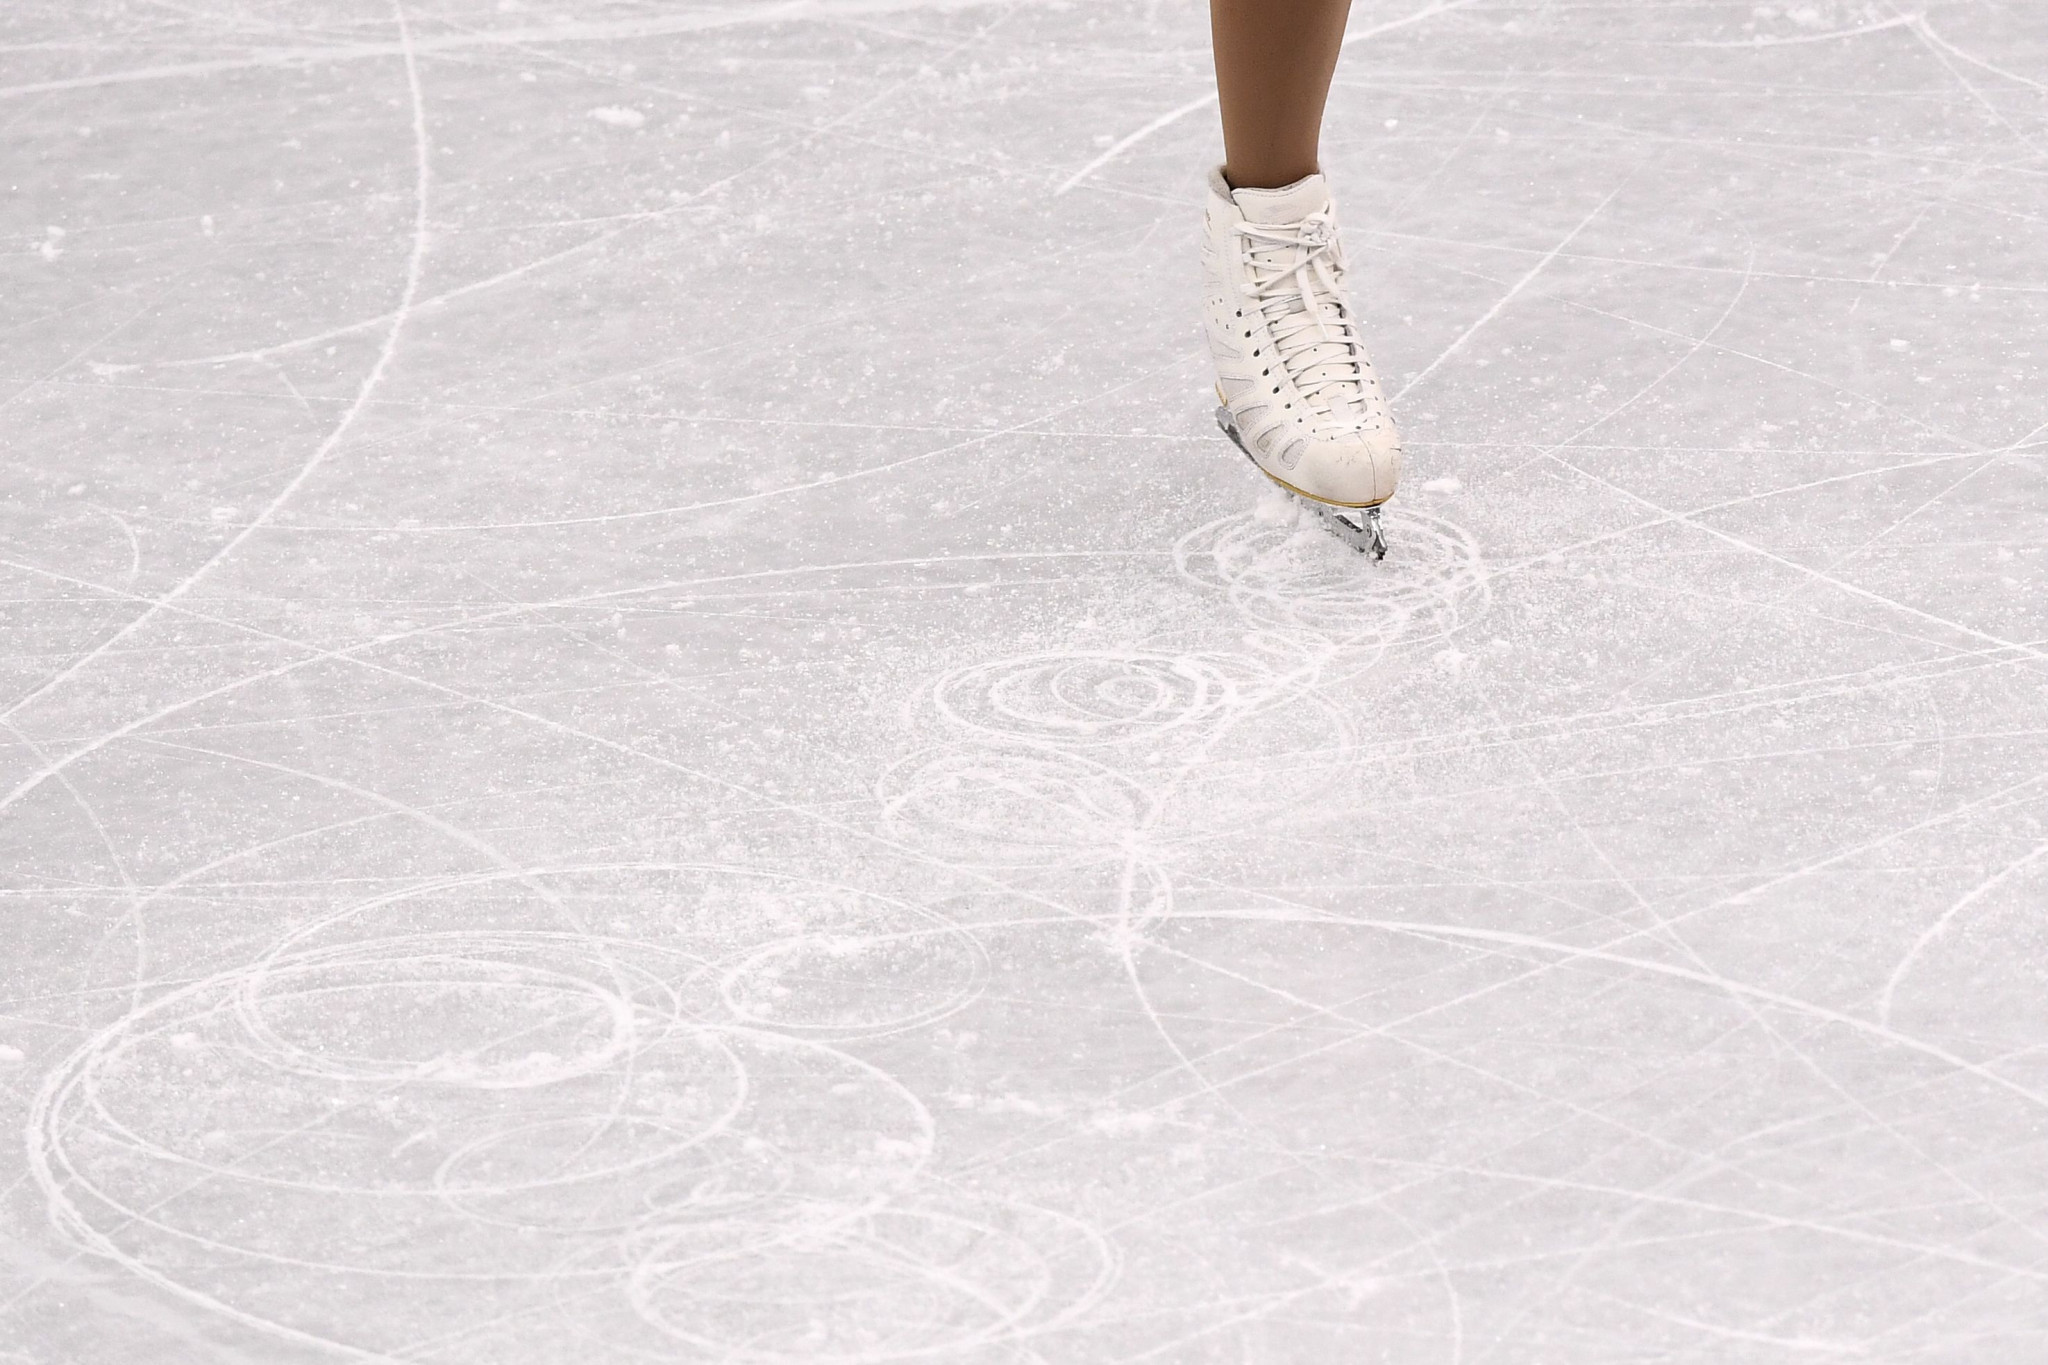 Skate Canada has launched an updated National Safe Sport Program ©Getty Images